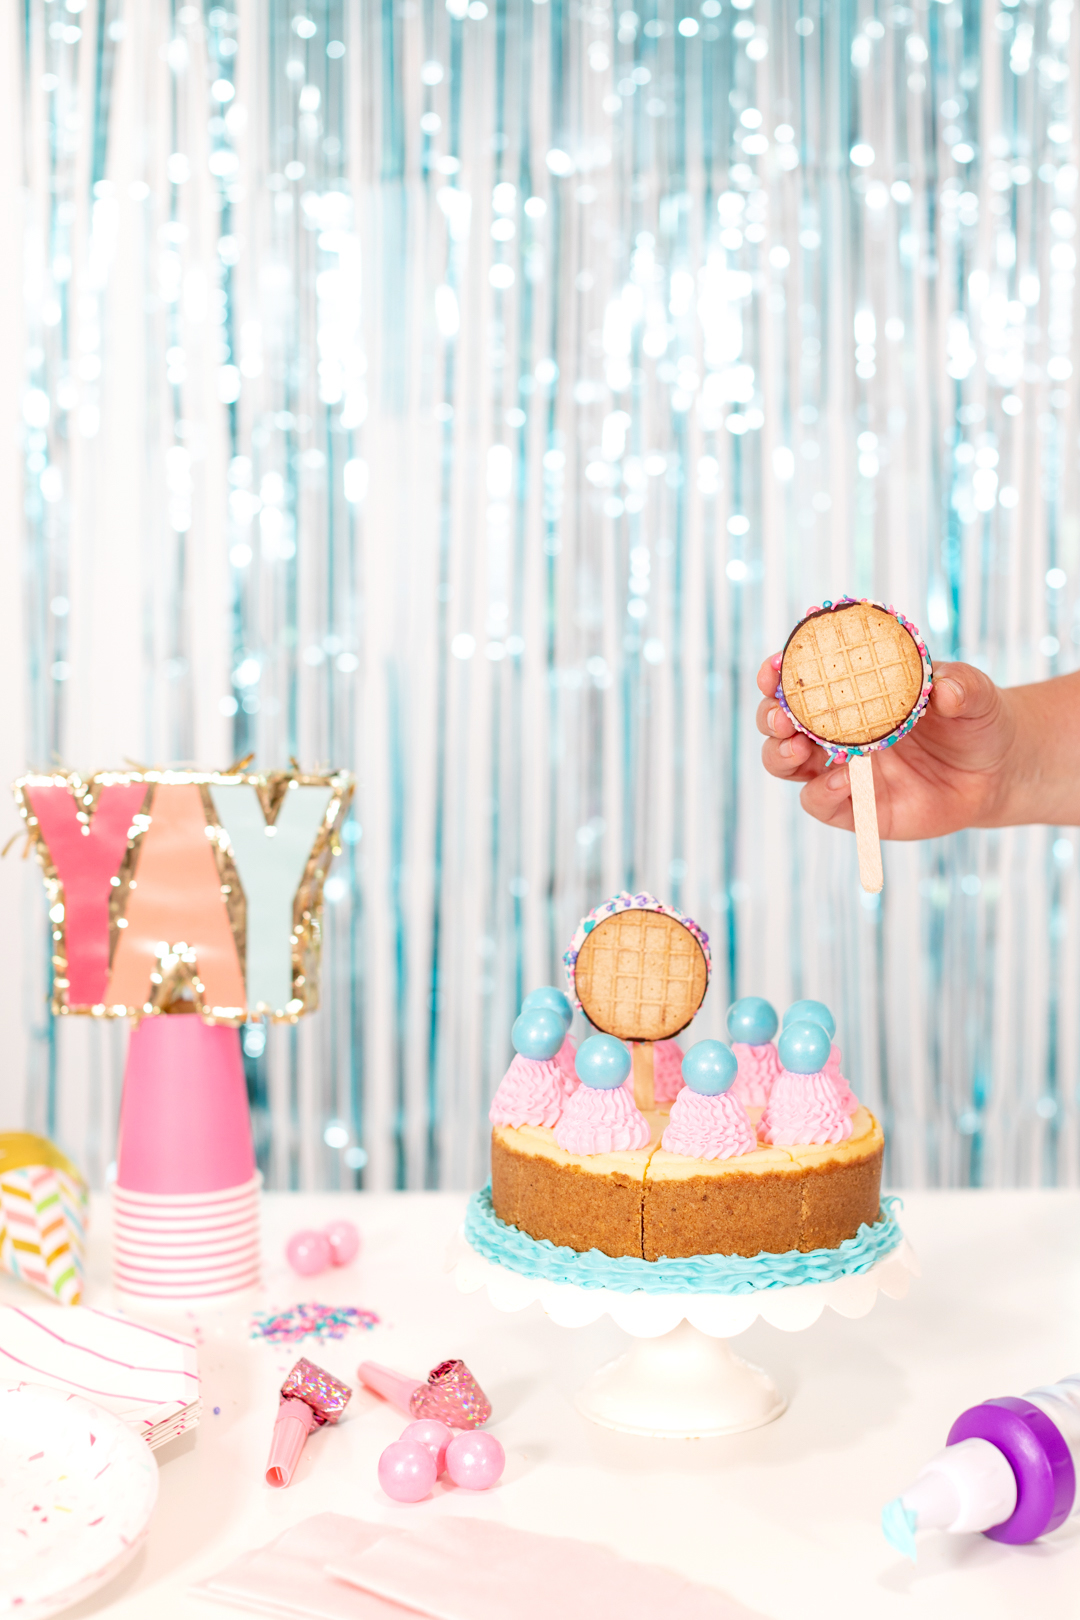 Adding ice cream sandwiches to the top of a birthday cake